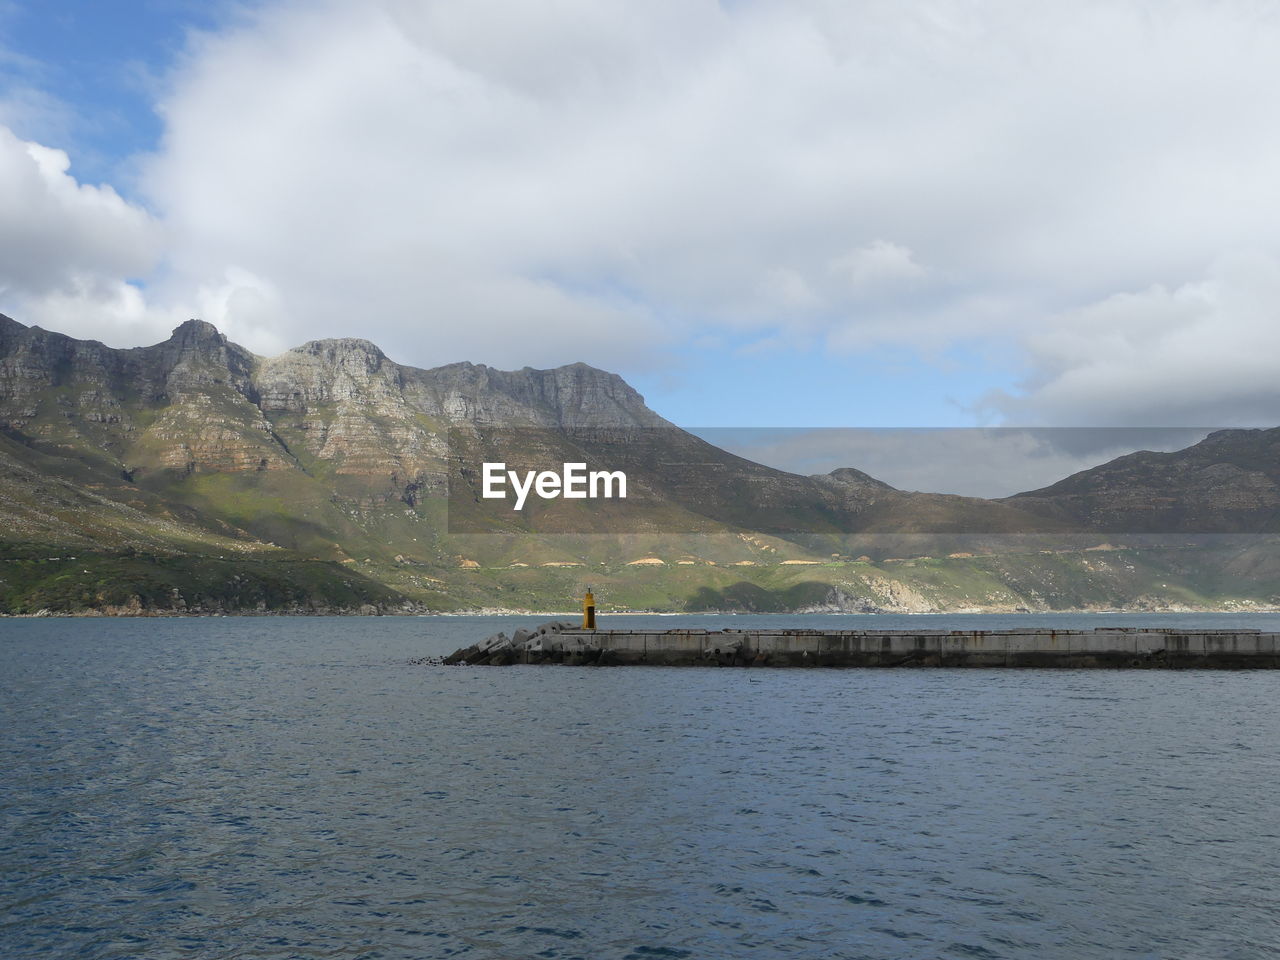 Hout bay harbour with chapmans peak , south africa